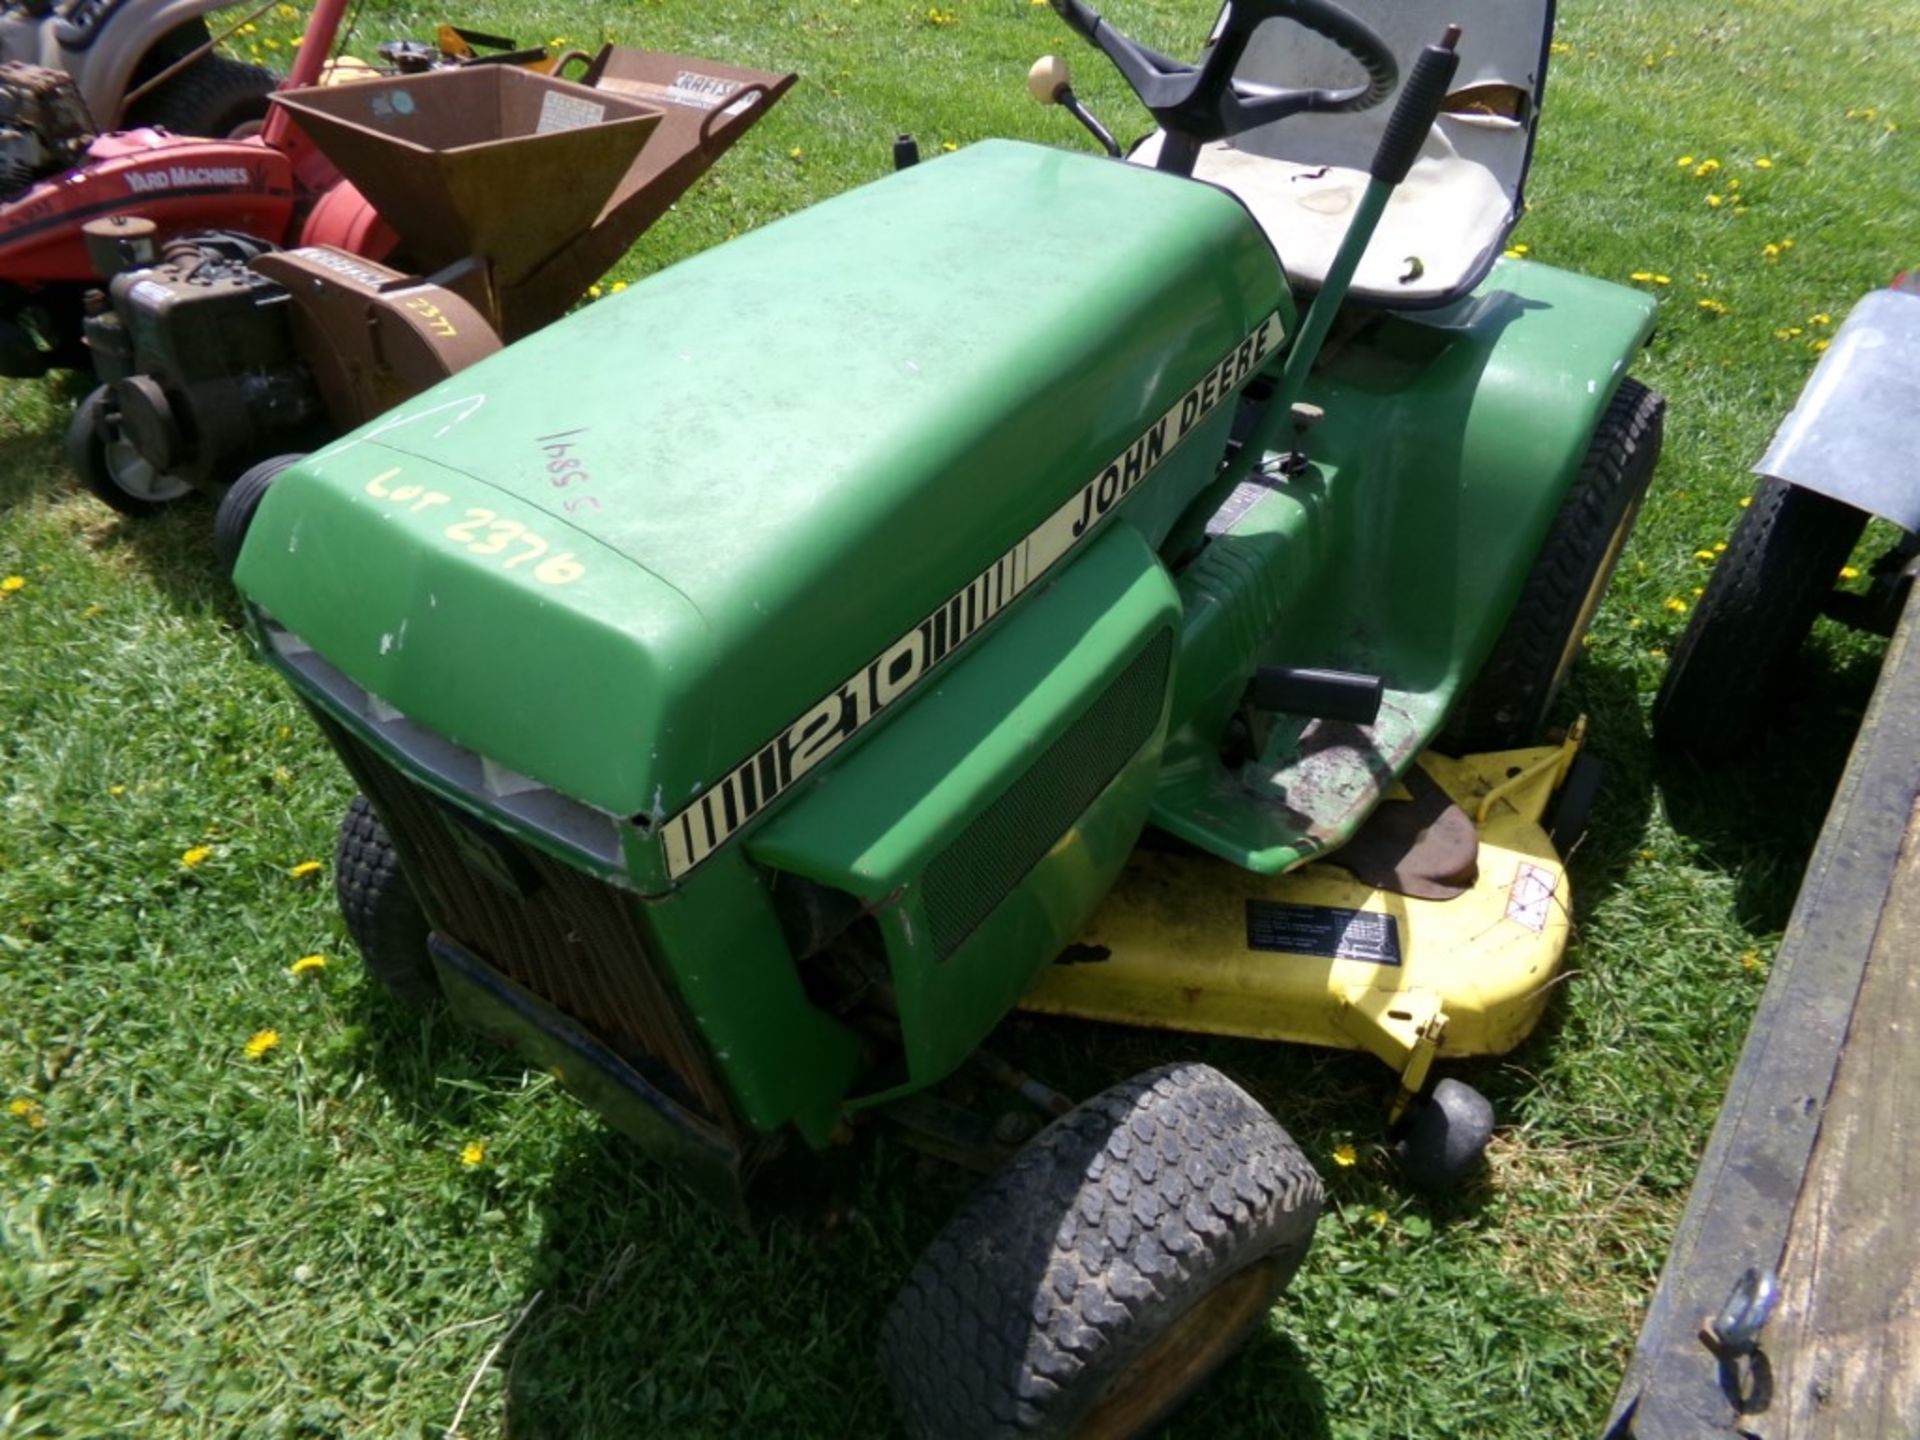 John Deere 210 with 46'' Deck and 14 HP Kohler Engine, NOT RUNNING-RAN WHEN PARKED (5841)